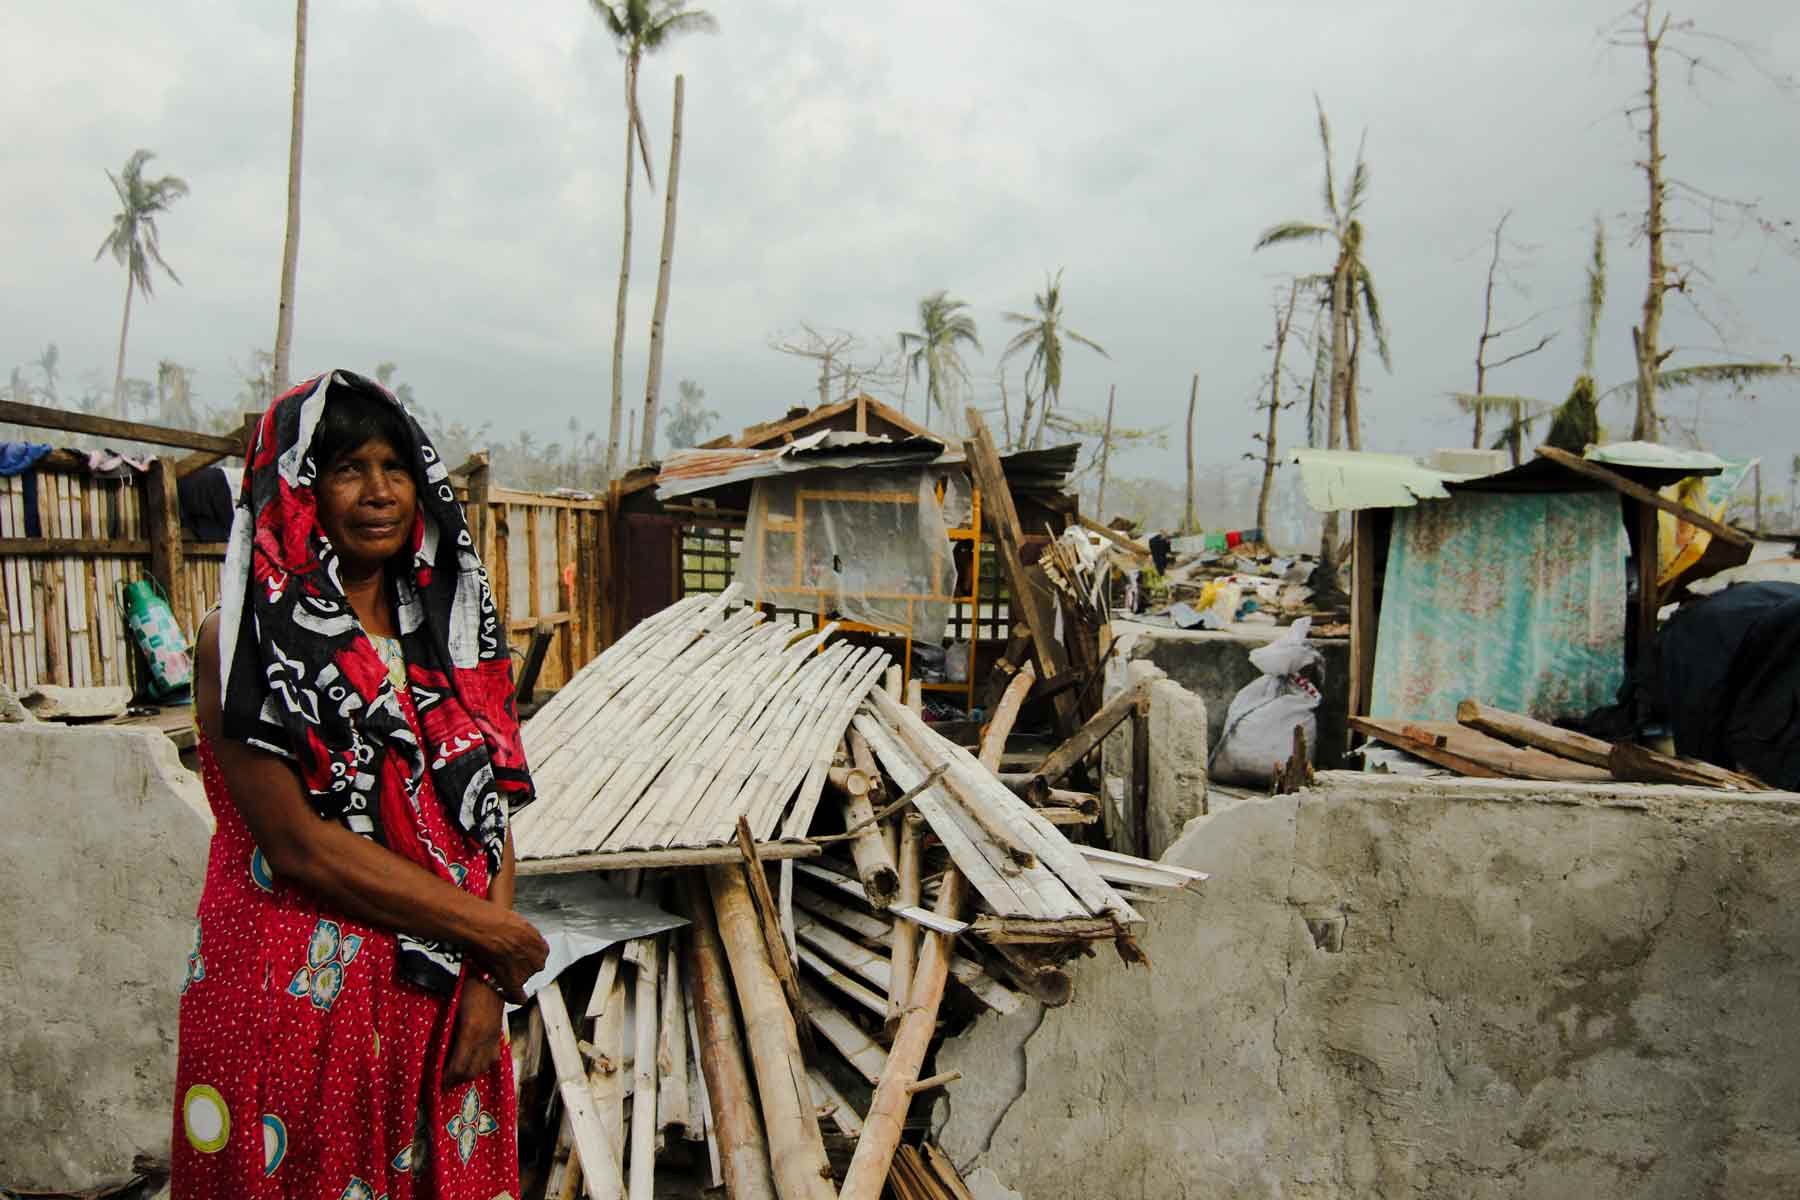 Woman standing in front of destroyed shack in tropical country